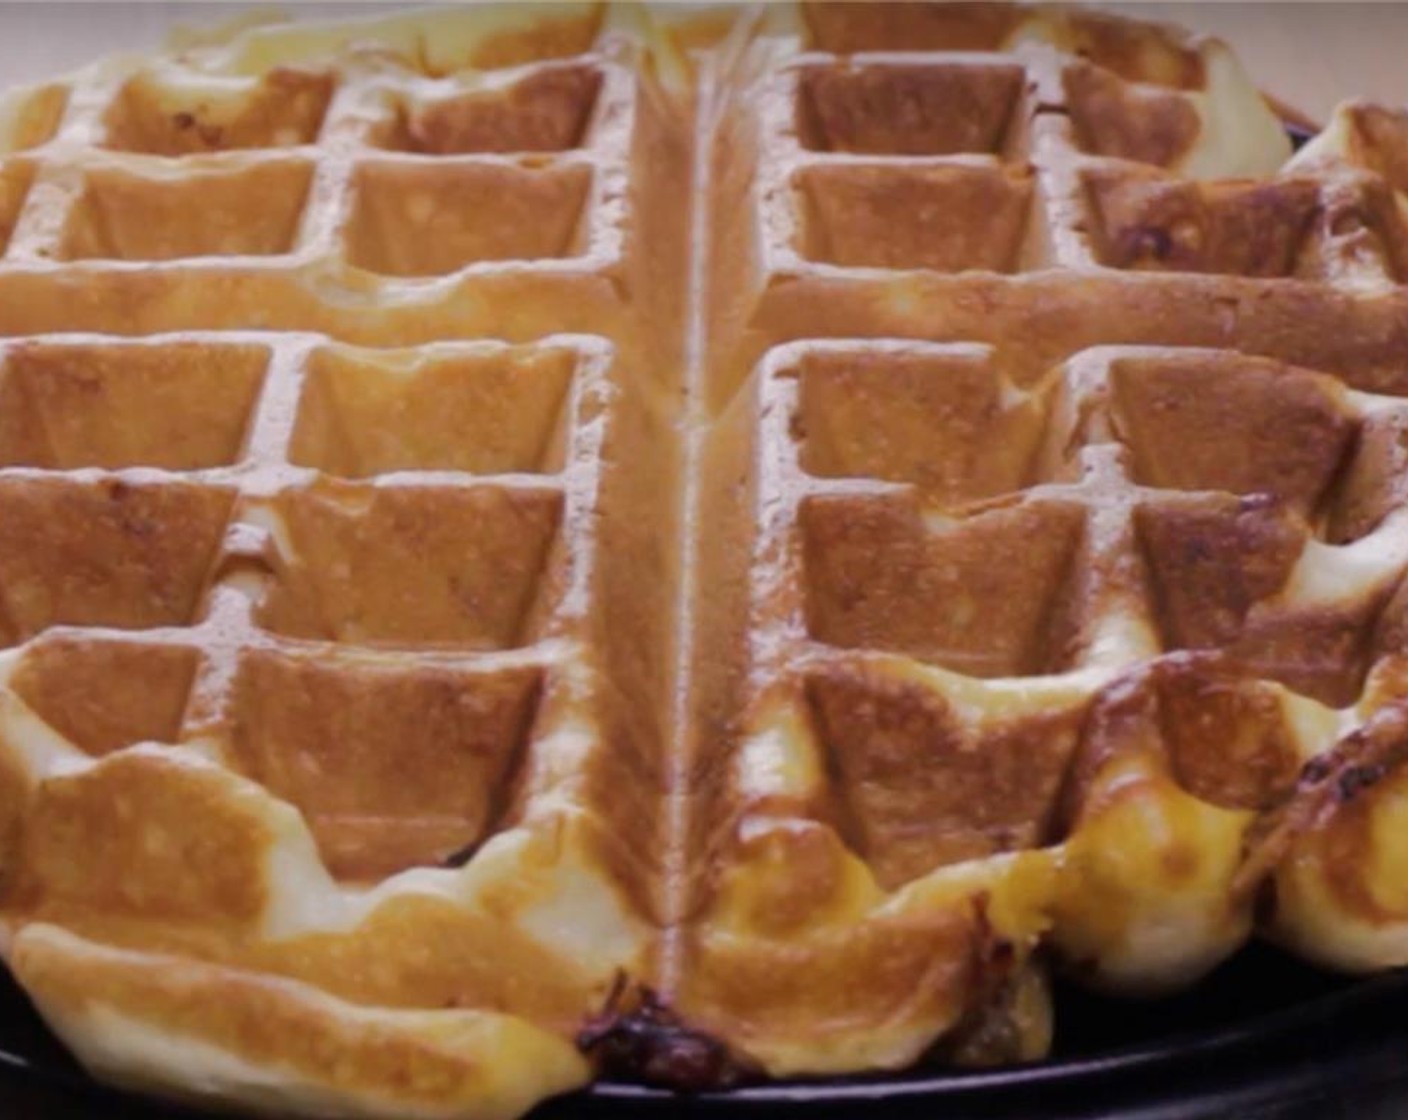 step 12 Open the waffle maker and check if it's golden brown in color with some darker cheese spots. Remove the pulled pork savory waffles carefully from the waffle maker and immediately flip it up in the air a few times. This will instantly develop a crisp outer layer.